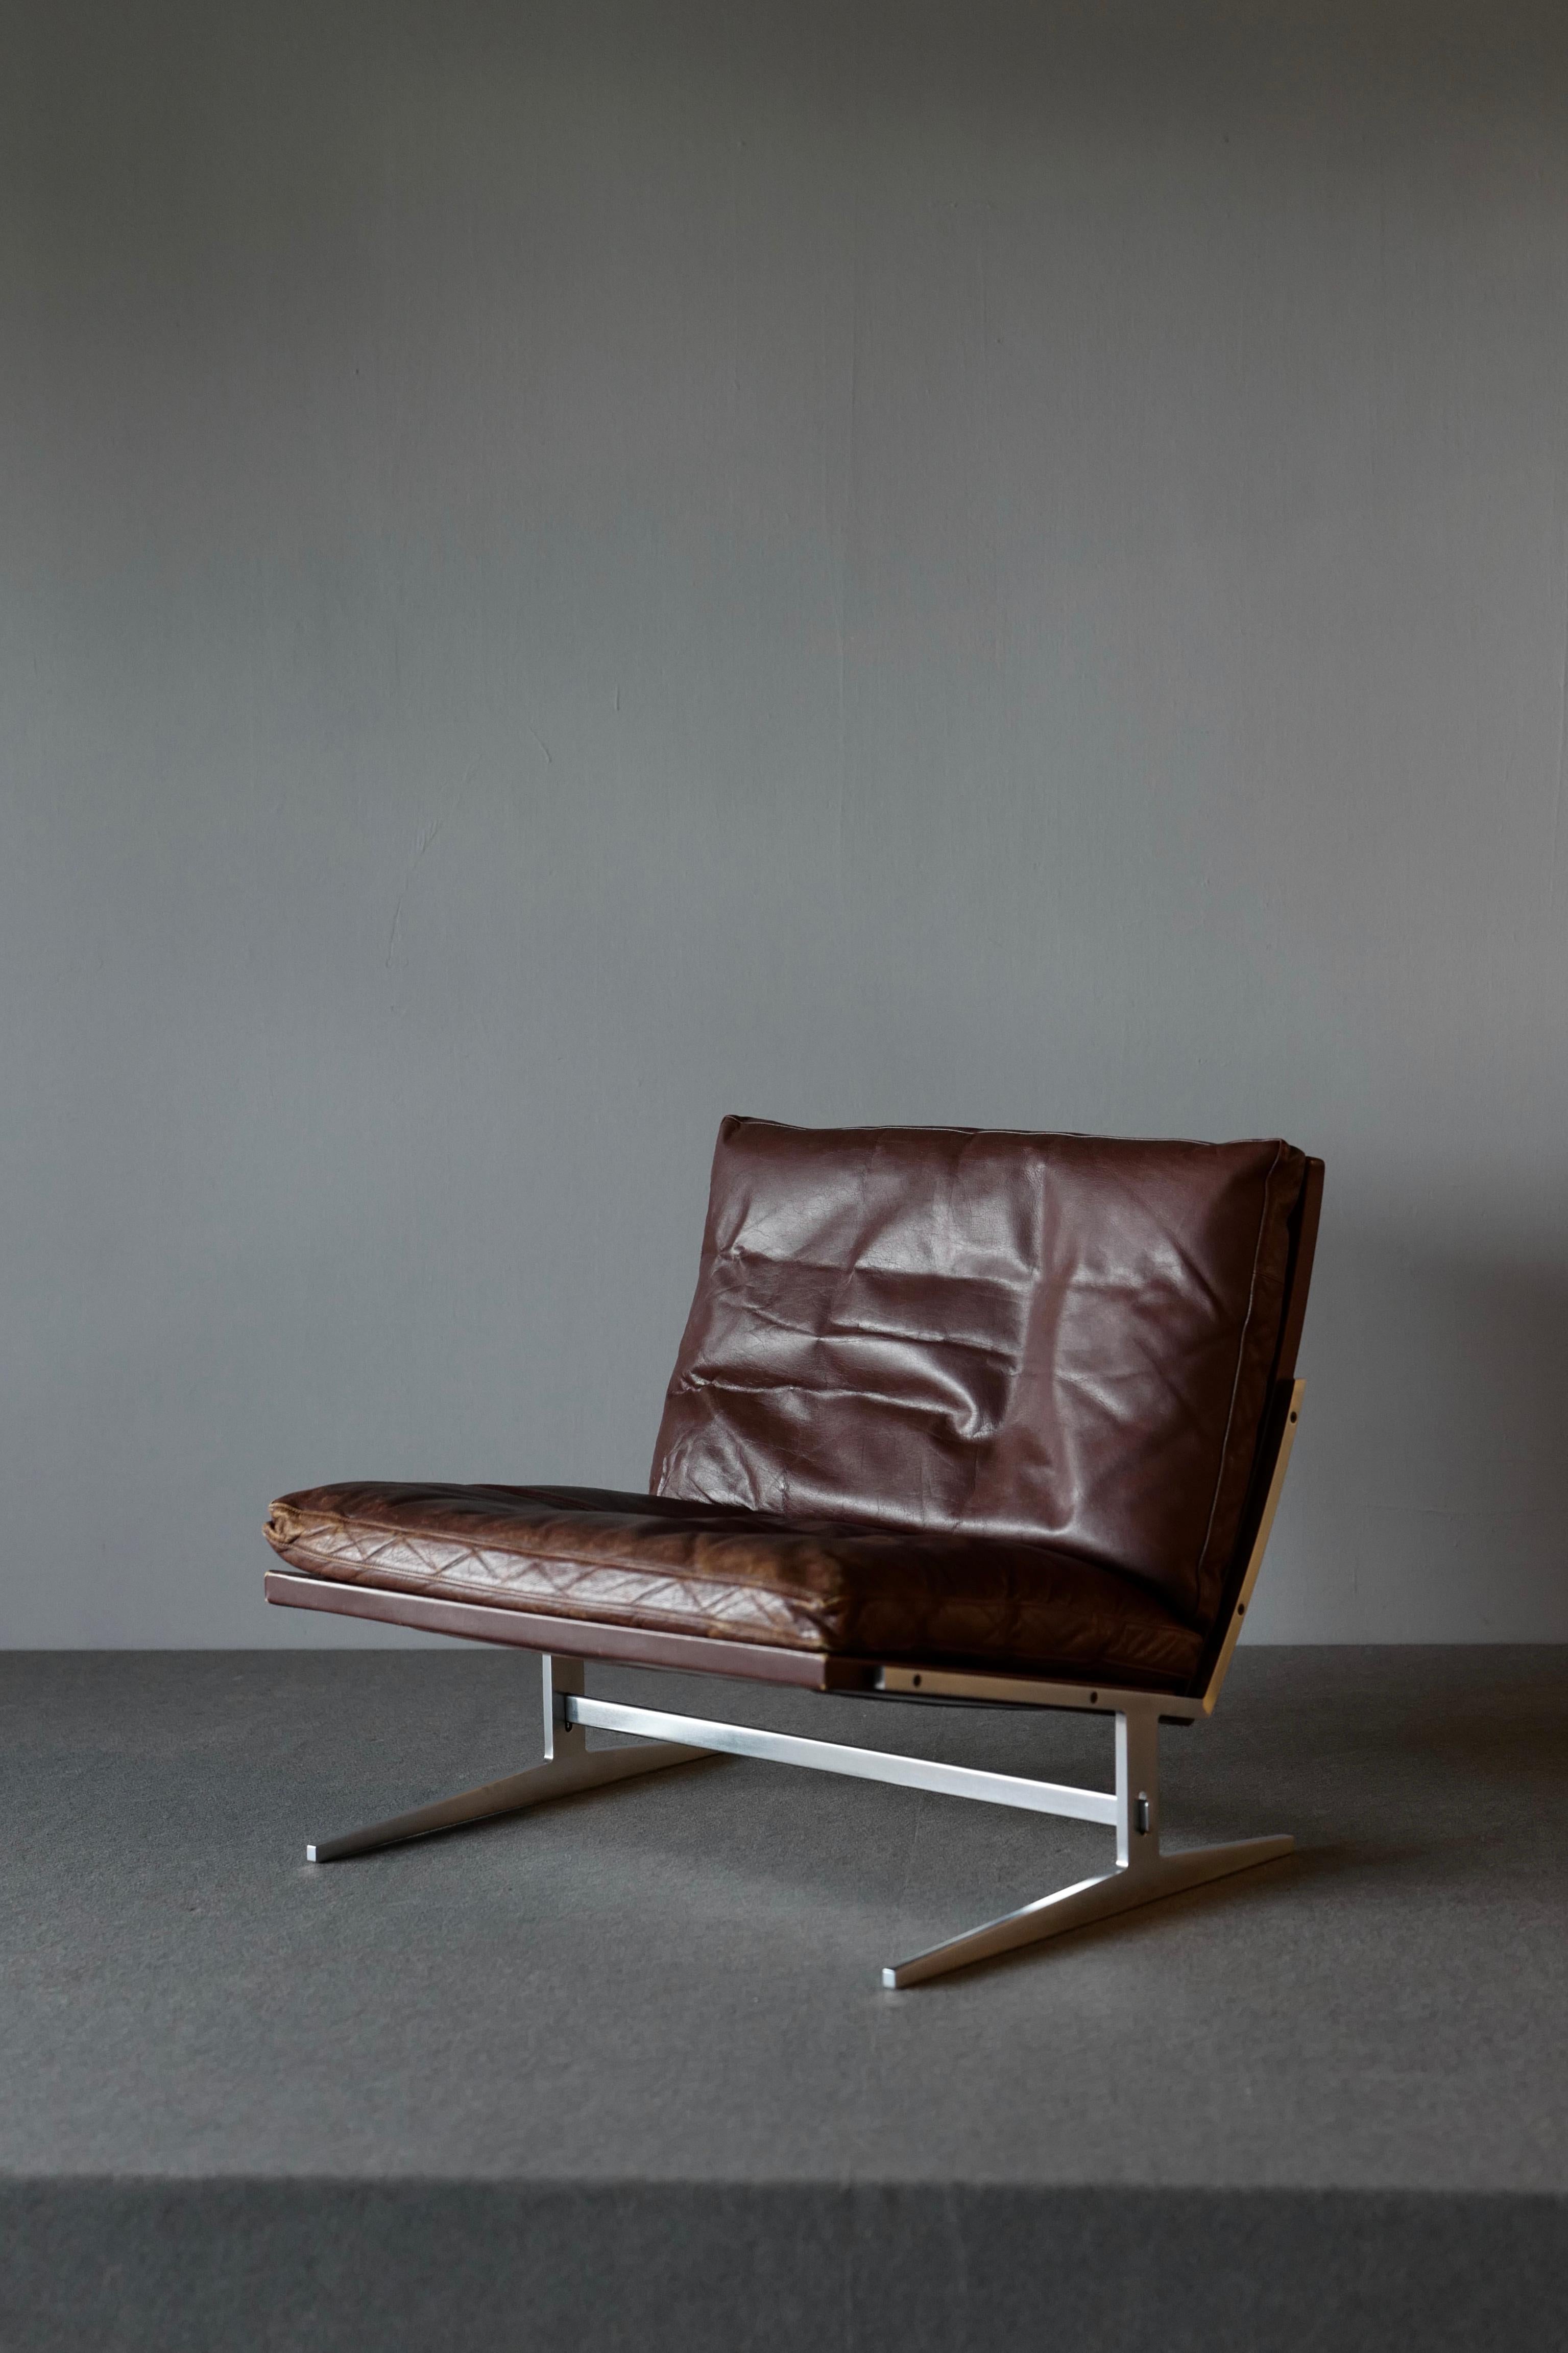 Chair by Preben Fabricus and Jorgen Kastholm for Bo-Ex. The chair has the distinctive tilted L-shaped seat and the double L-shaped base. It is executed in steel. The back and loose cushions are upholstered in well patinated brown leather. The